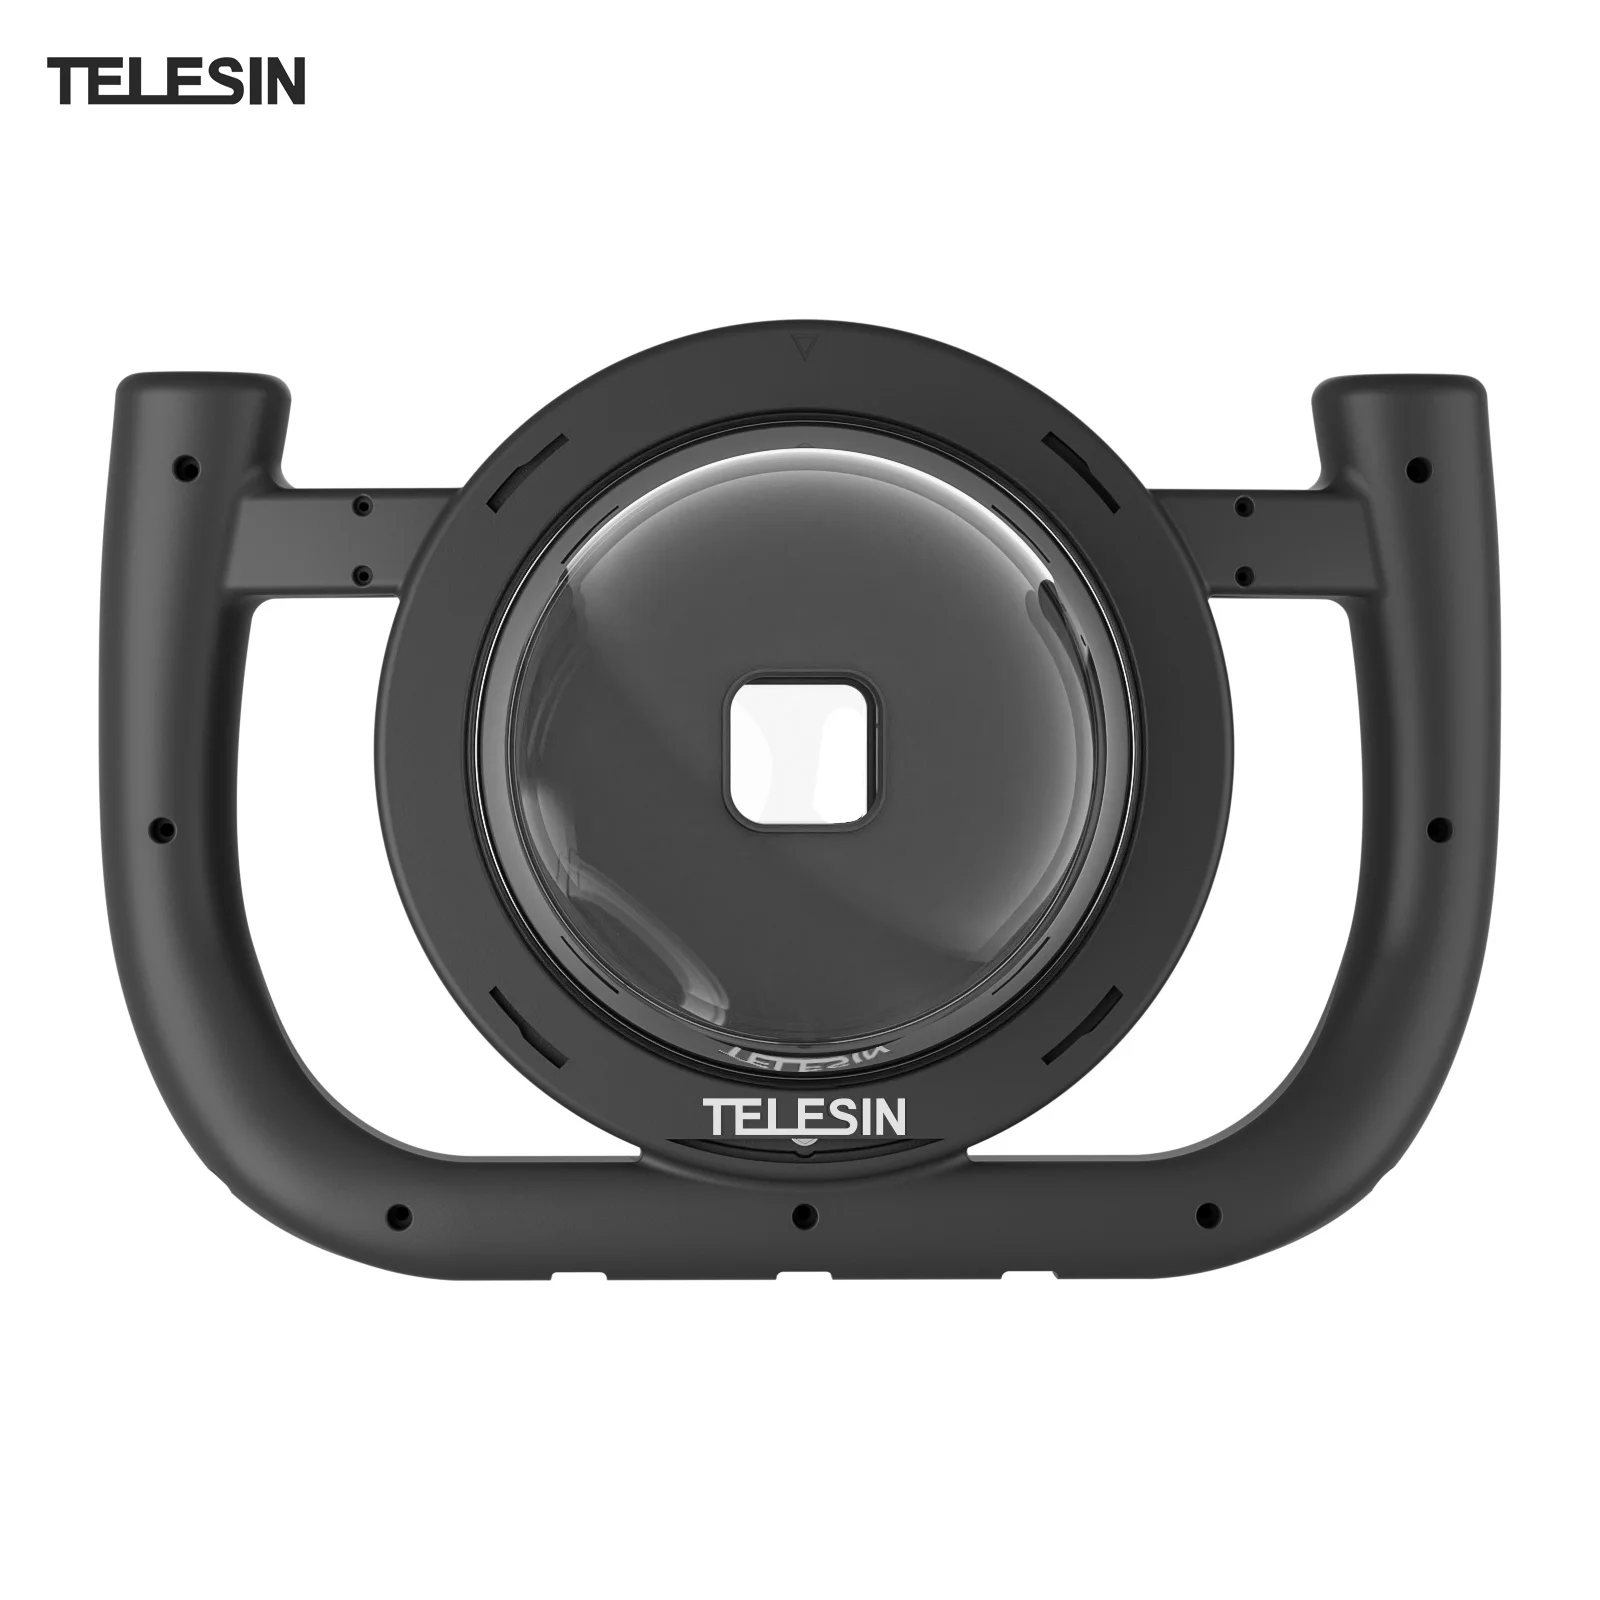 

TELESIN GP-DMP-T10 Waterproof Dome Port Replacement for GoPro Hero with 30M Waterproof Housing Dual Handle Stabilizer Diving Set